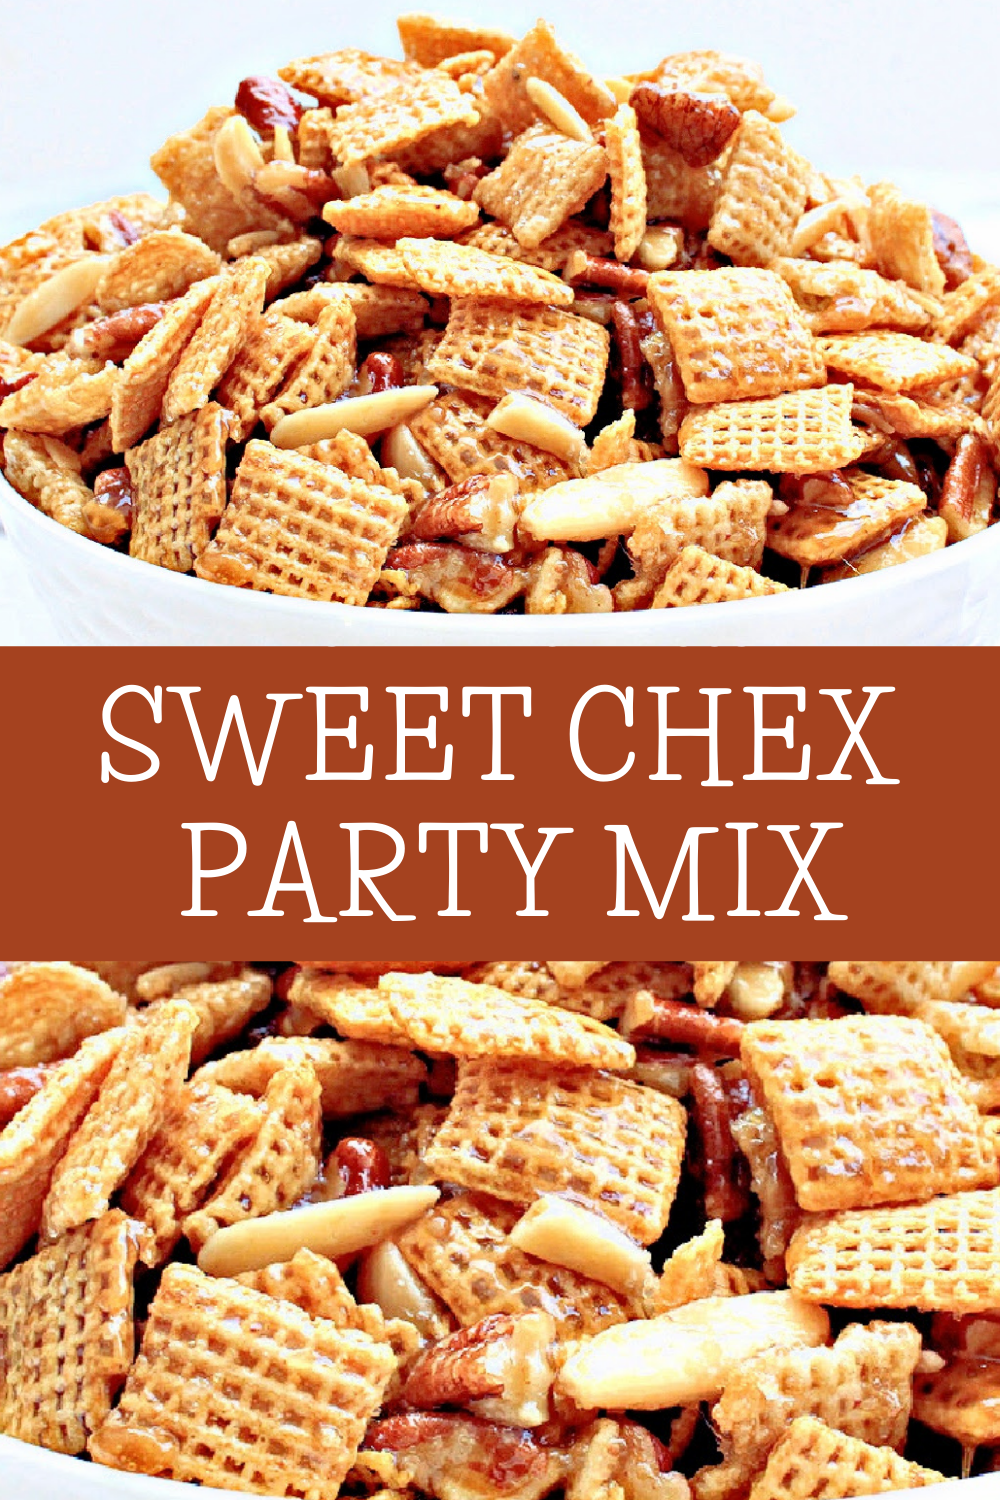 Sweet Chex Party Mix ~ This nutty, sweet, and highly addictive treat is perfect for holiday snacking and gifting! via @thiswifecooks